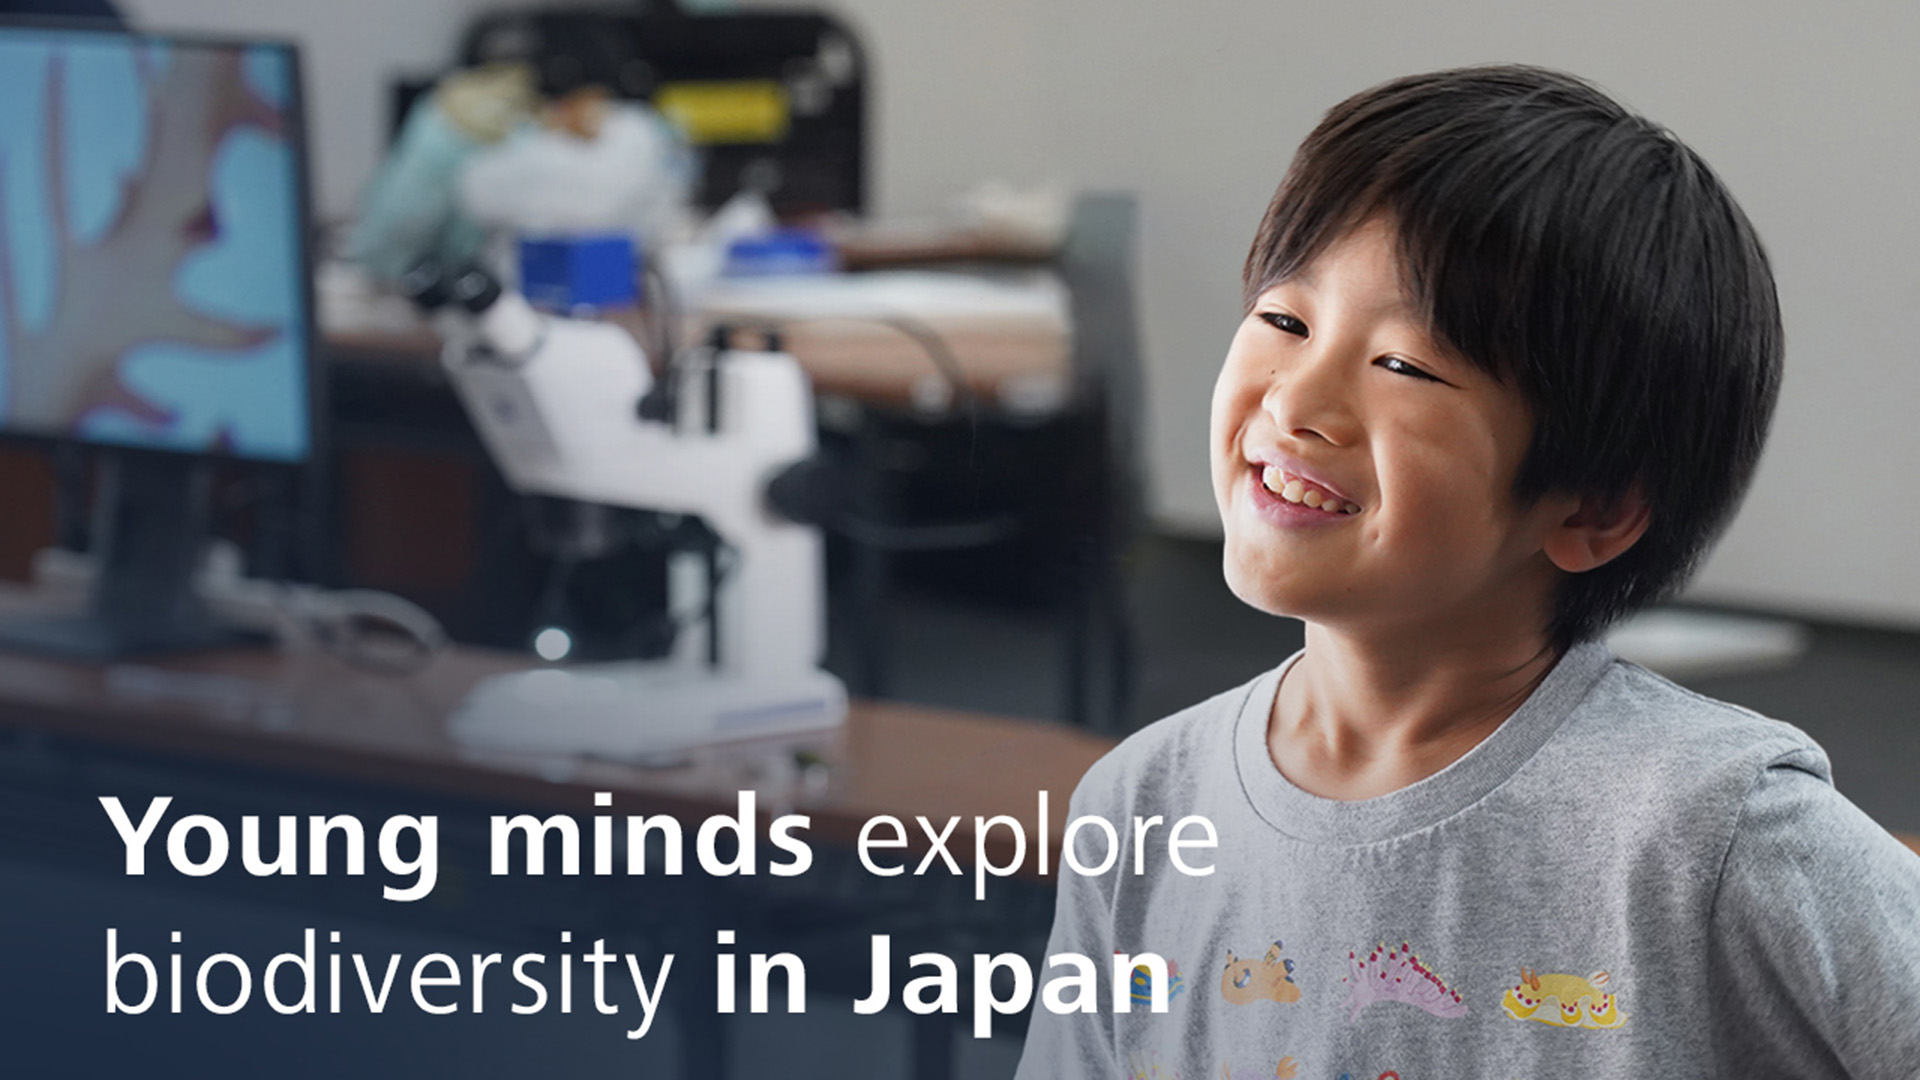 Young minds explore biodiversity and environmental protection in Japan with ZEISS 